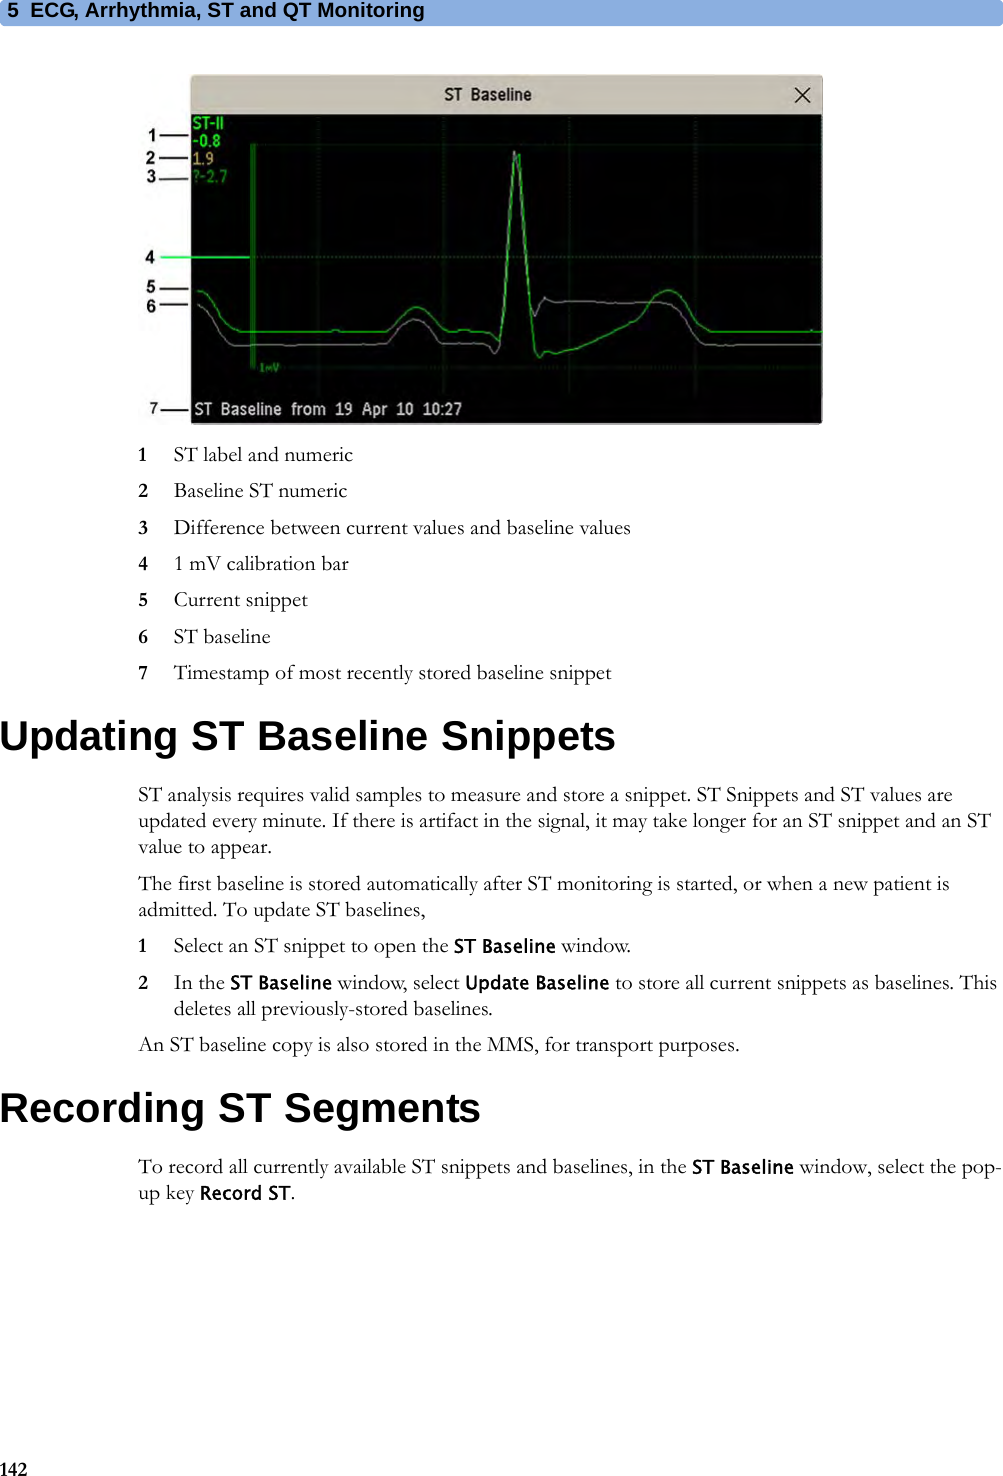 5 ECG, Arrhythmia, ST and QT Monitoring1421ST label and numeric2Baseline ST numeric3Difference between current values and baseline values41 mV calibration bar5Current snippet6ST baseline7Timestamp of most recently stored baseline snippetUpdating ST Baseline SnippetsST analysis requires valid samples to measure and store a snippet. ST Snippets and ST values are updated every minute. If there is artifact in the signal, it may take longer for an ST snippet and an ST value to appear.The first baseline is stored automatically after ST monitoring is started, or when a new patient is admitted. To update ST baselines,1Select an ST snippet to open the ST Baseline window.2In the ST Baseline window, select Update Baseline to store all current snippets as baselines. This deletes all previously-stored baselines.An ST baseline copy is also stored in the MMS, for transport purposes.Recording ST SegmentsTo record all currently available ST snippets and baselines, in the ST Baseline window, select the pop-up key Record ST.